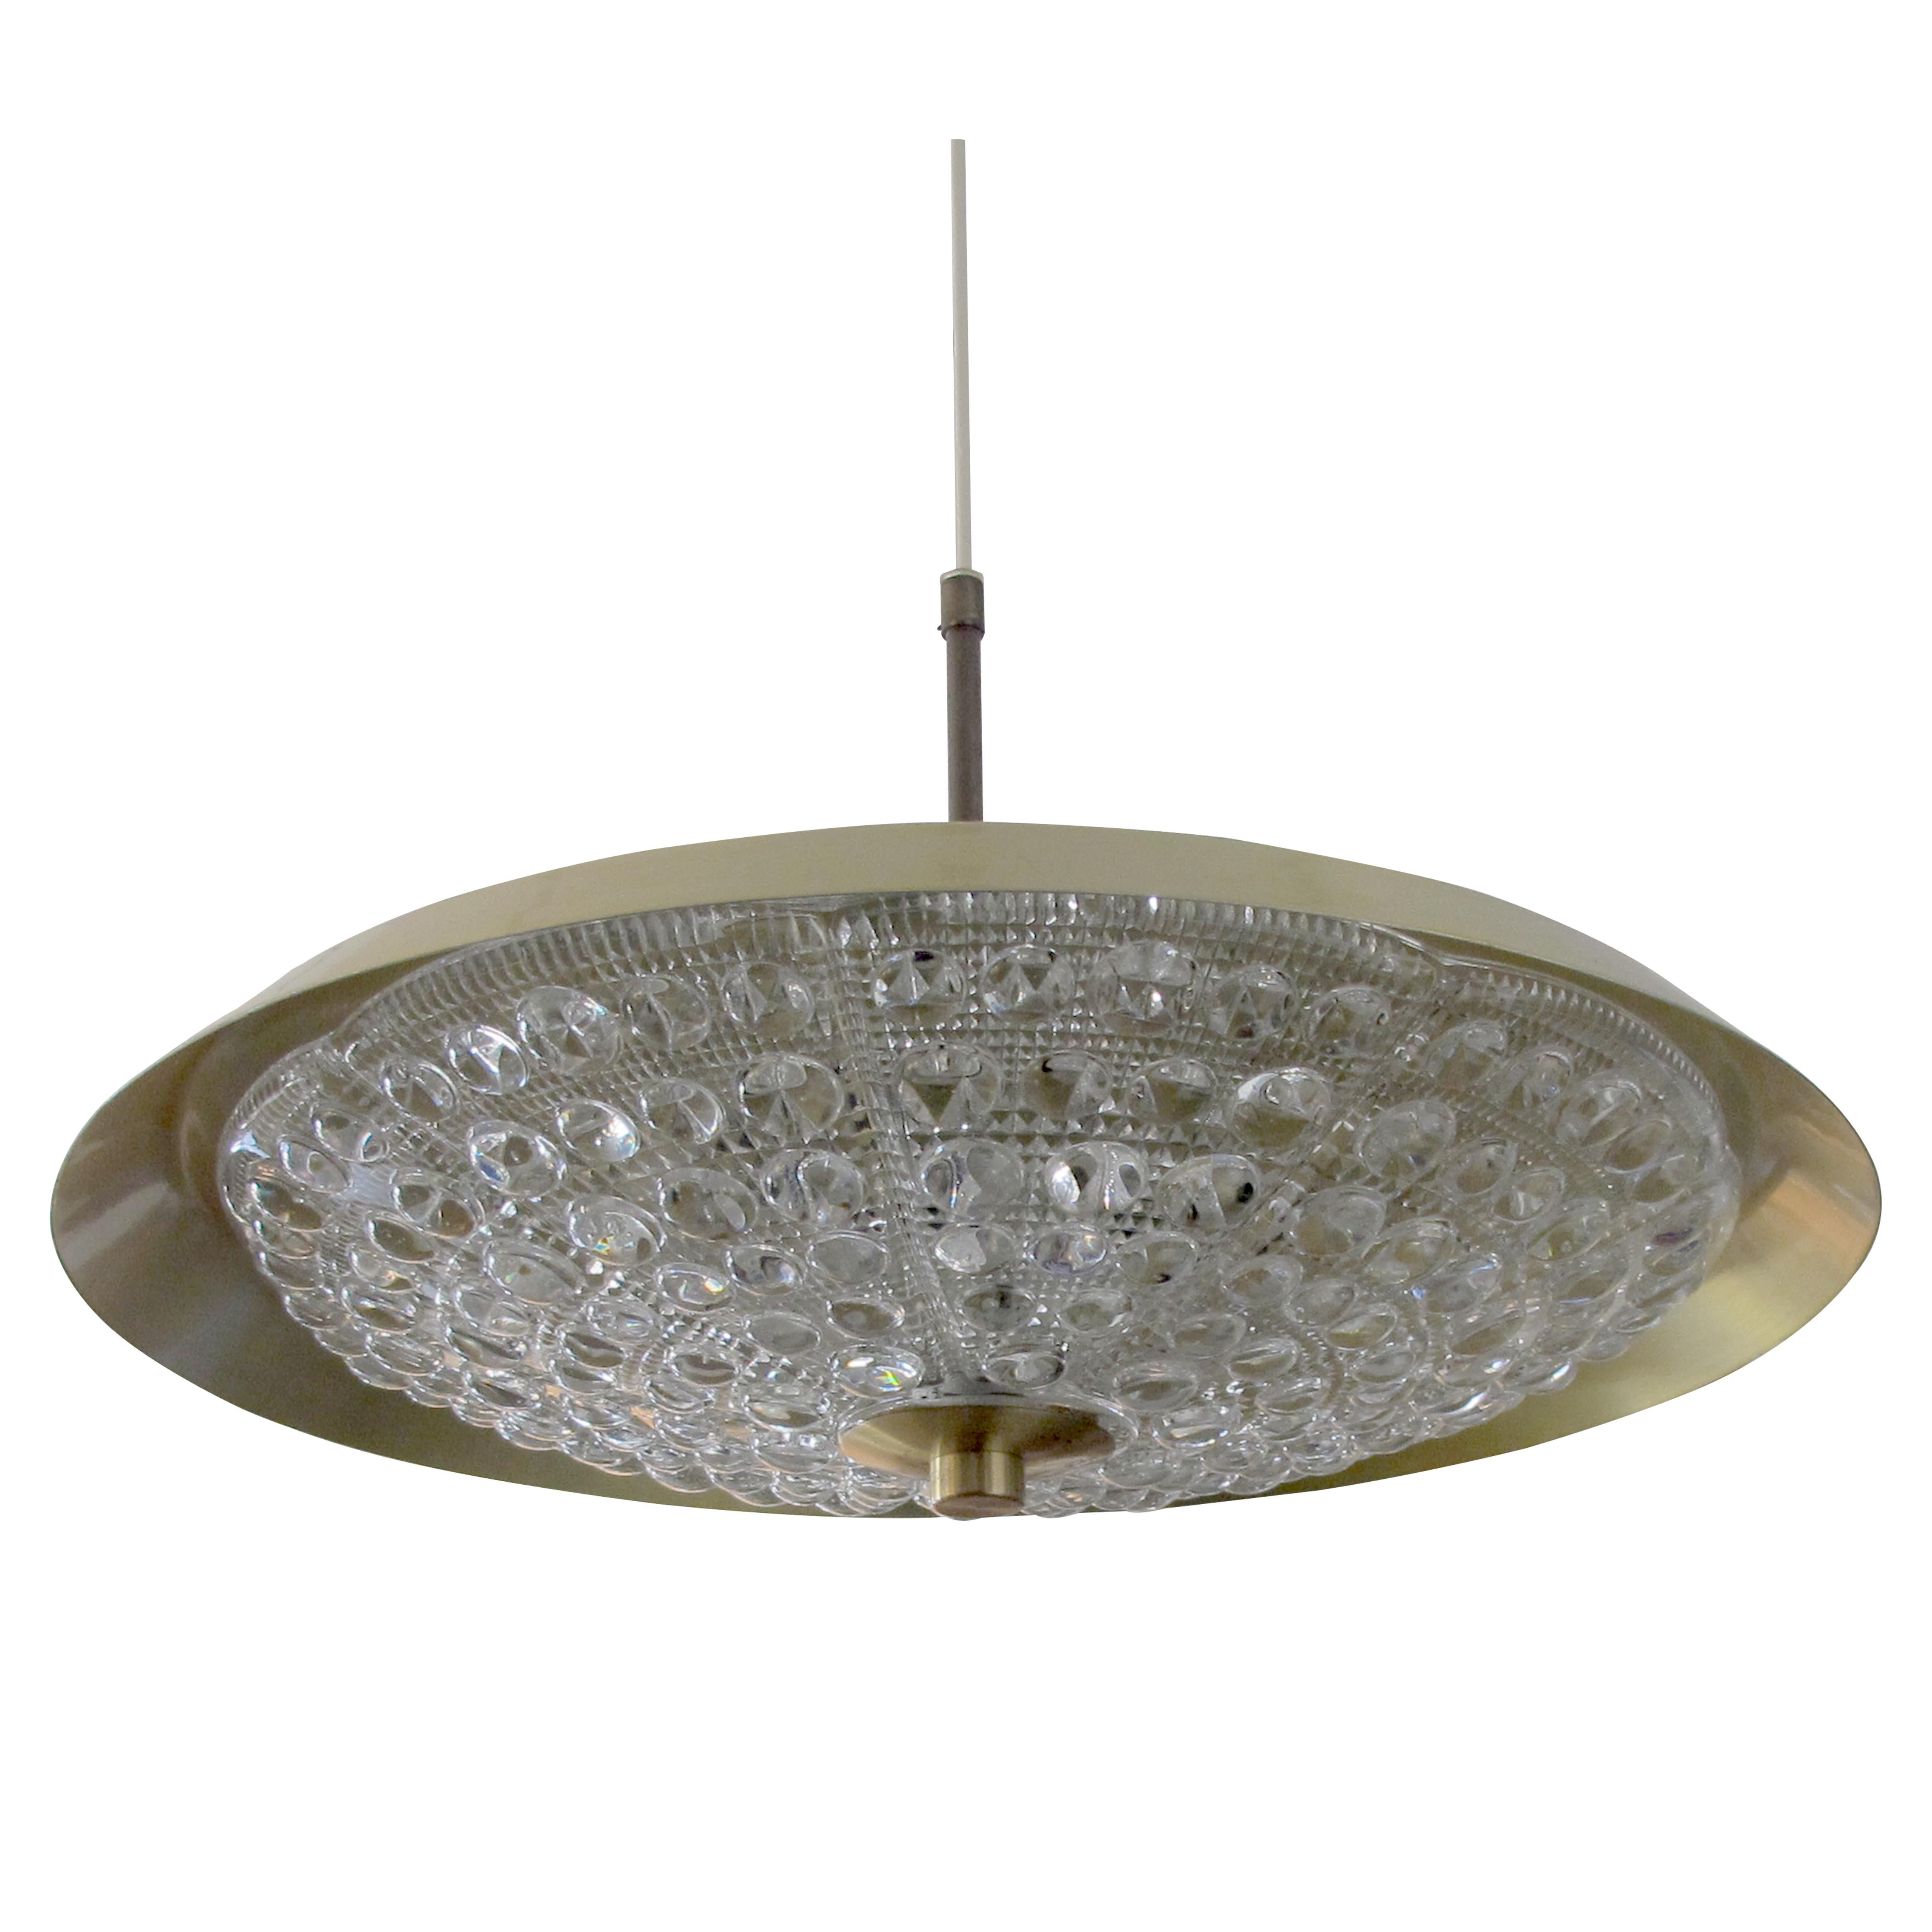 Mid-Century Modern 1960s Swedish Brass and Glass Ceiling Pendant Light with Moulded Glass